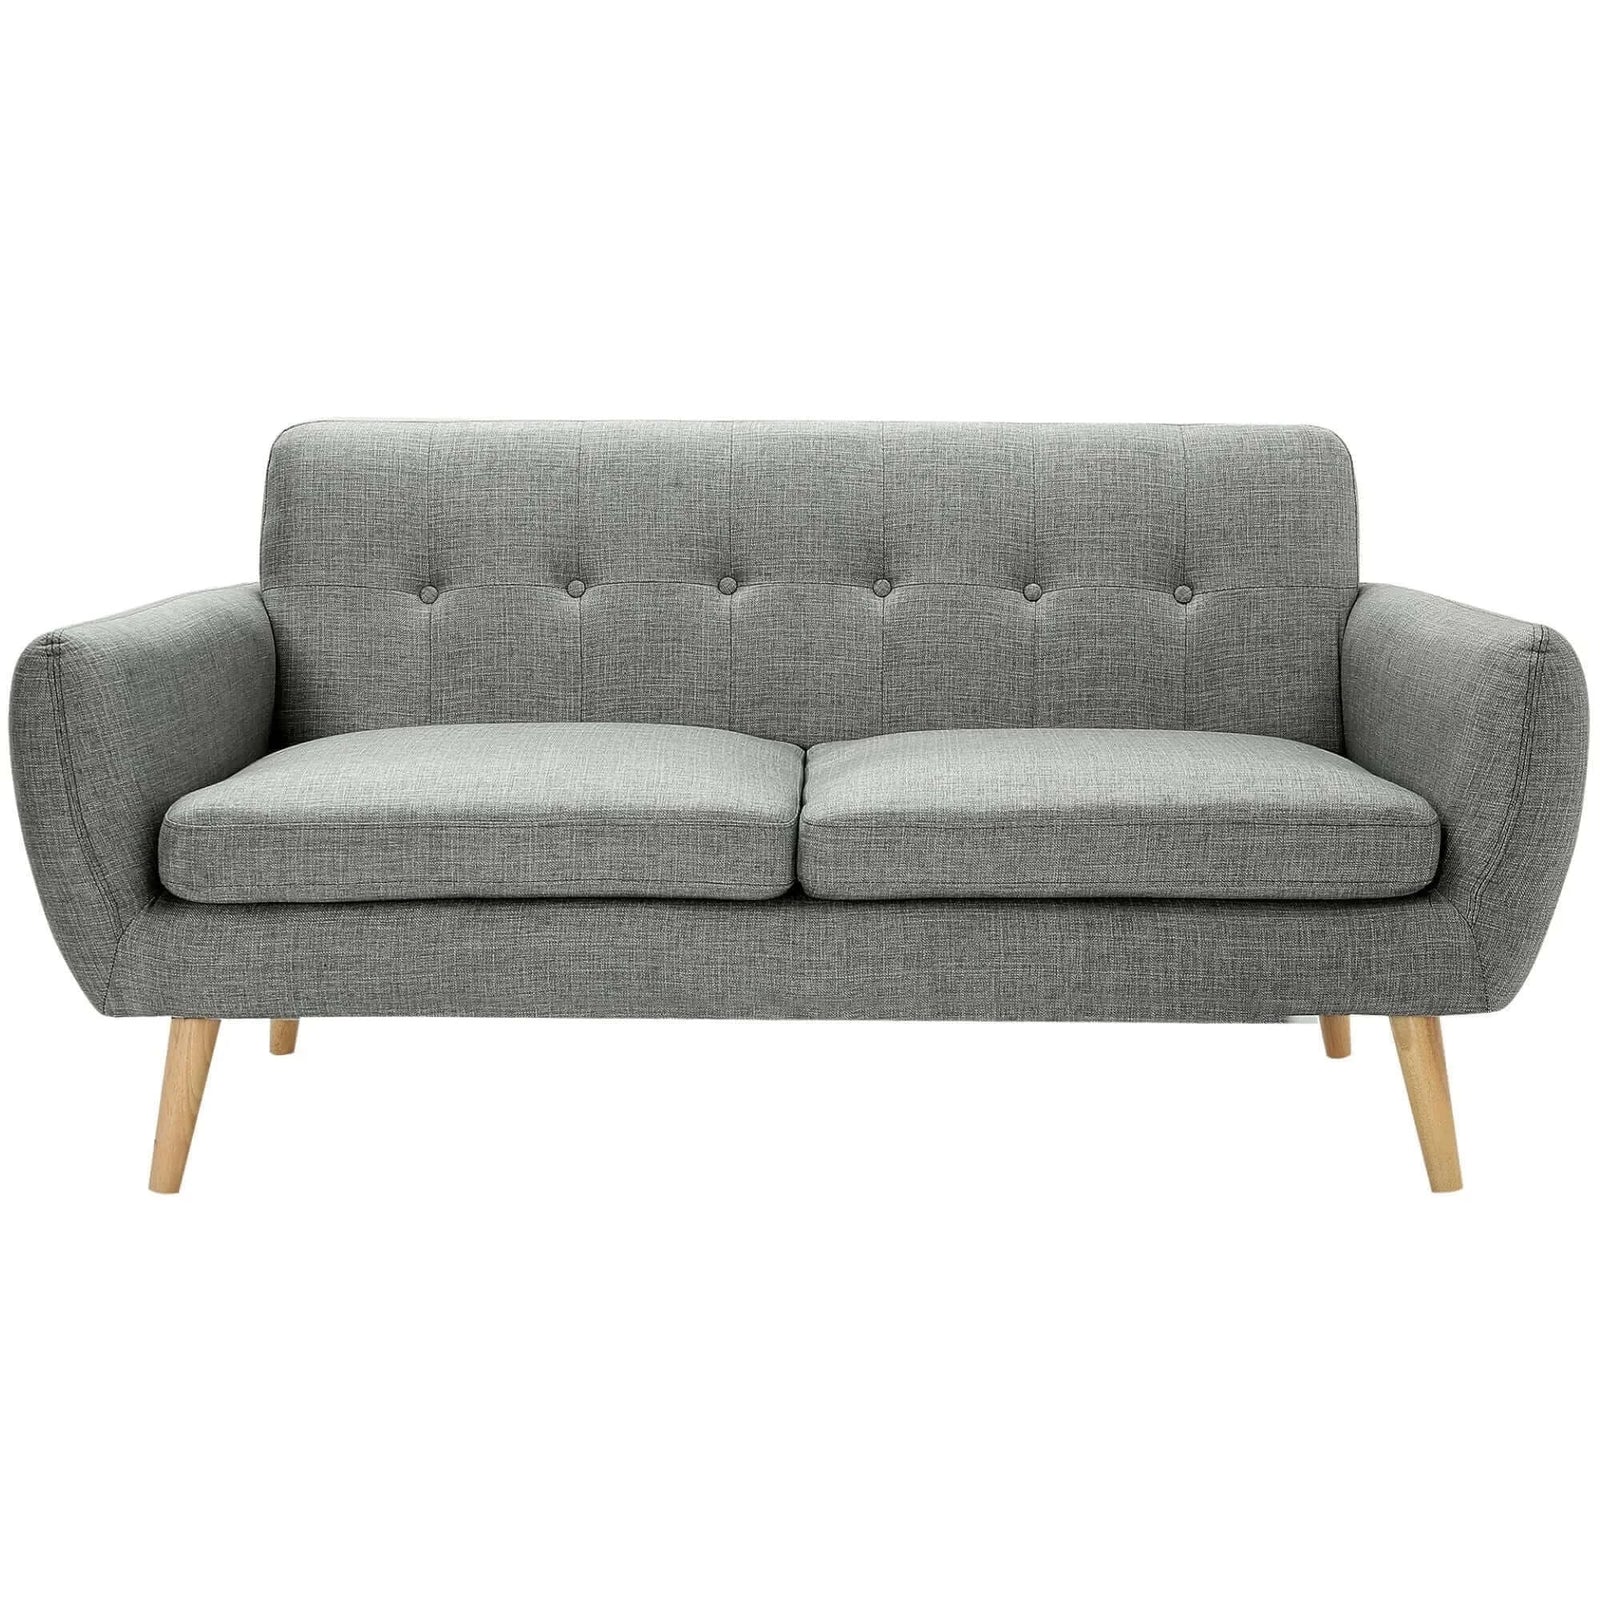 Buy dane 3 seater fabric upholstered sofa lounge couch - mid grey - upinteriors-Upinteriors